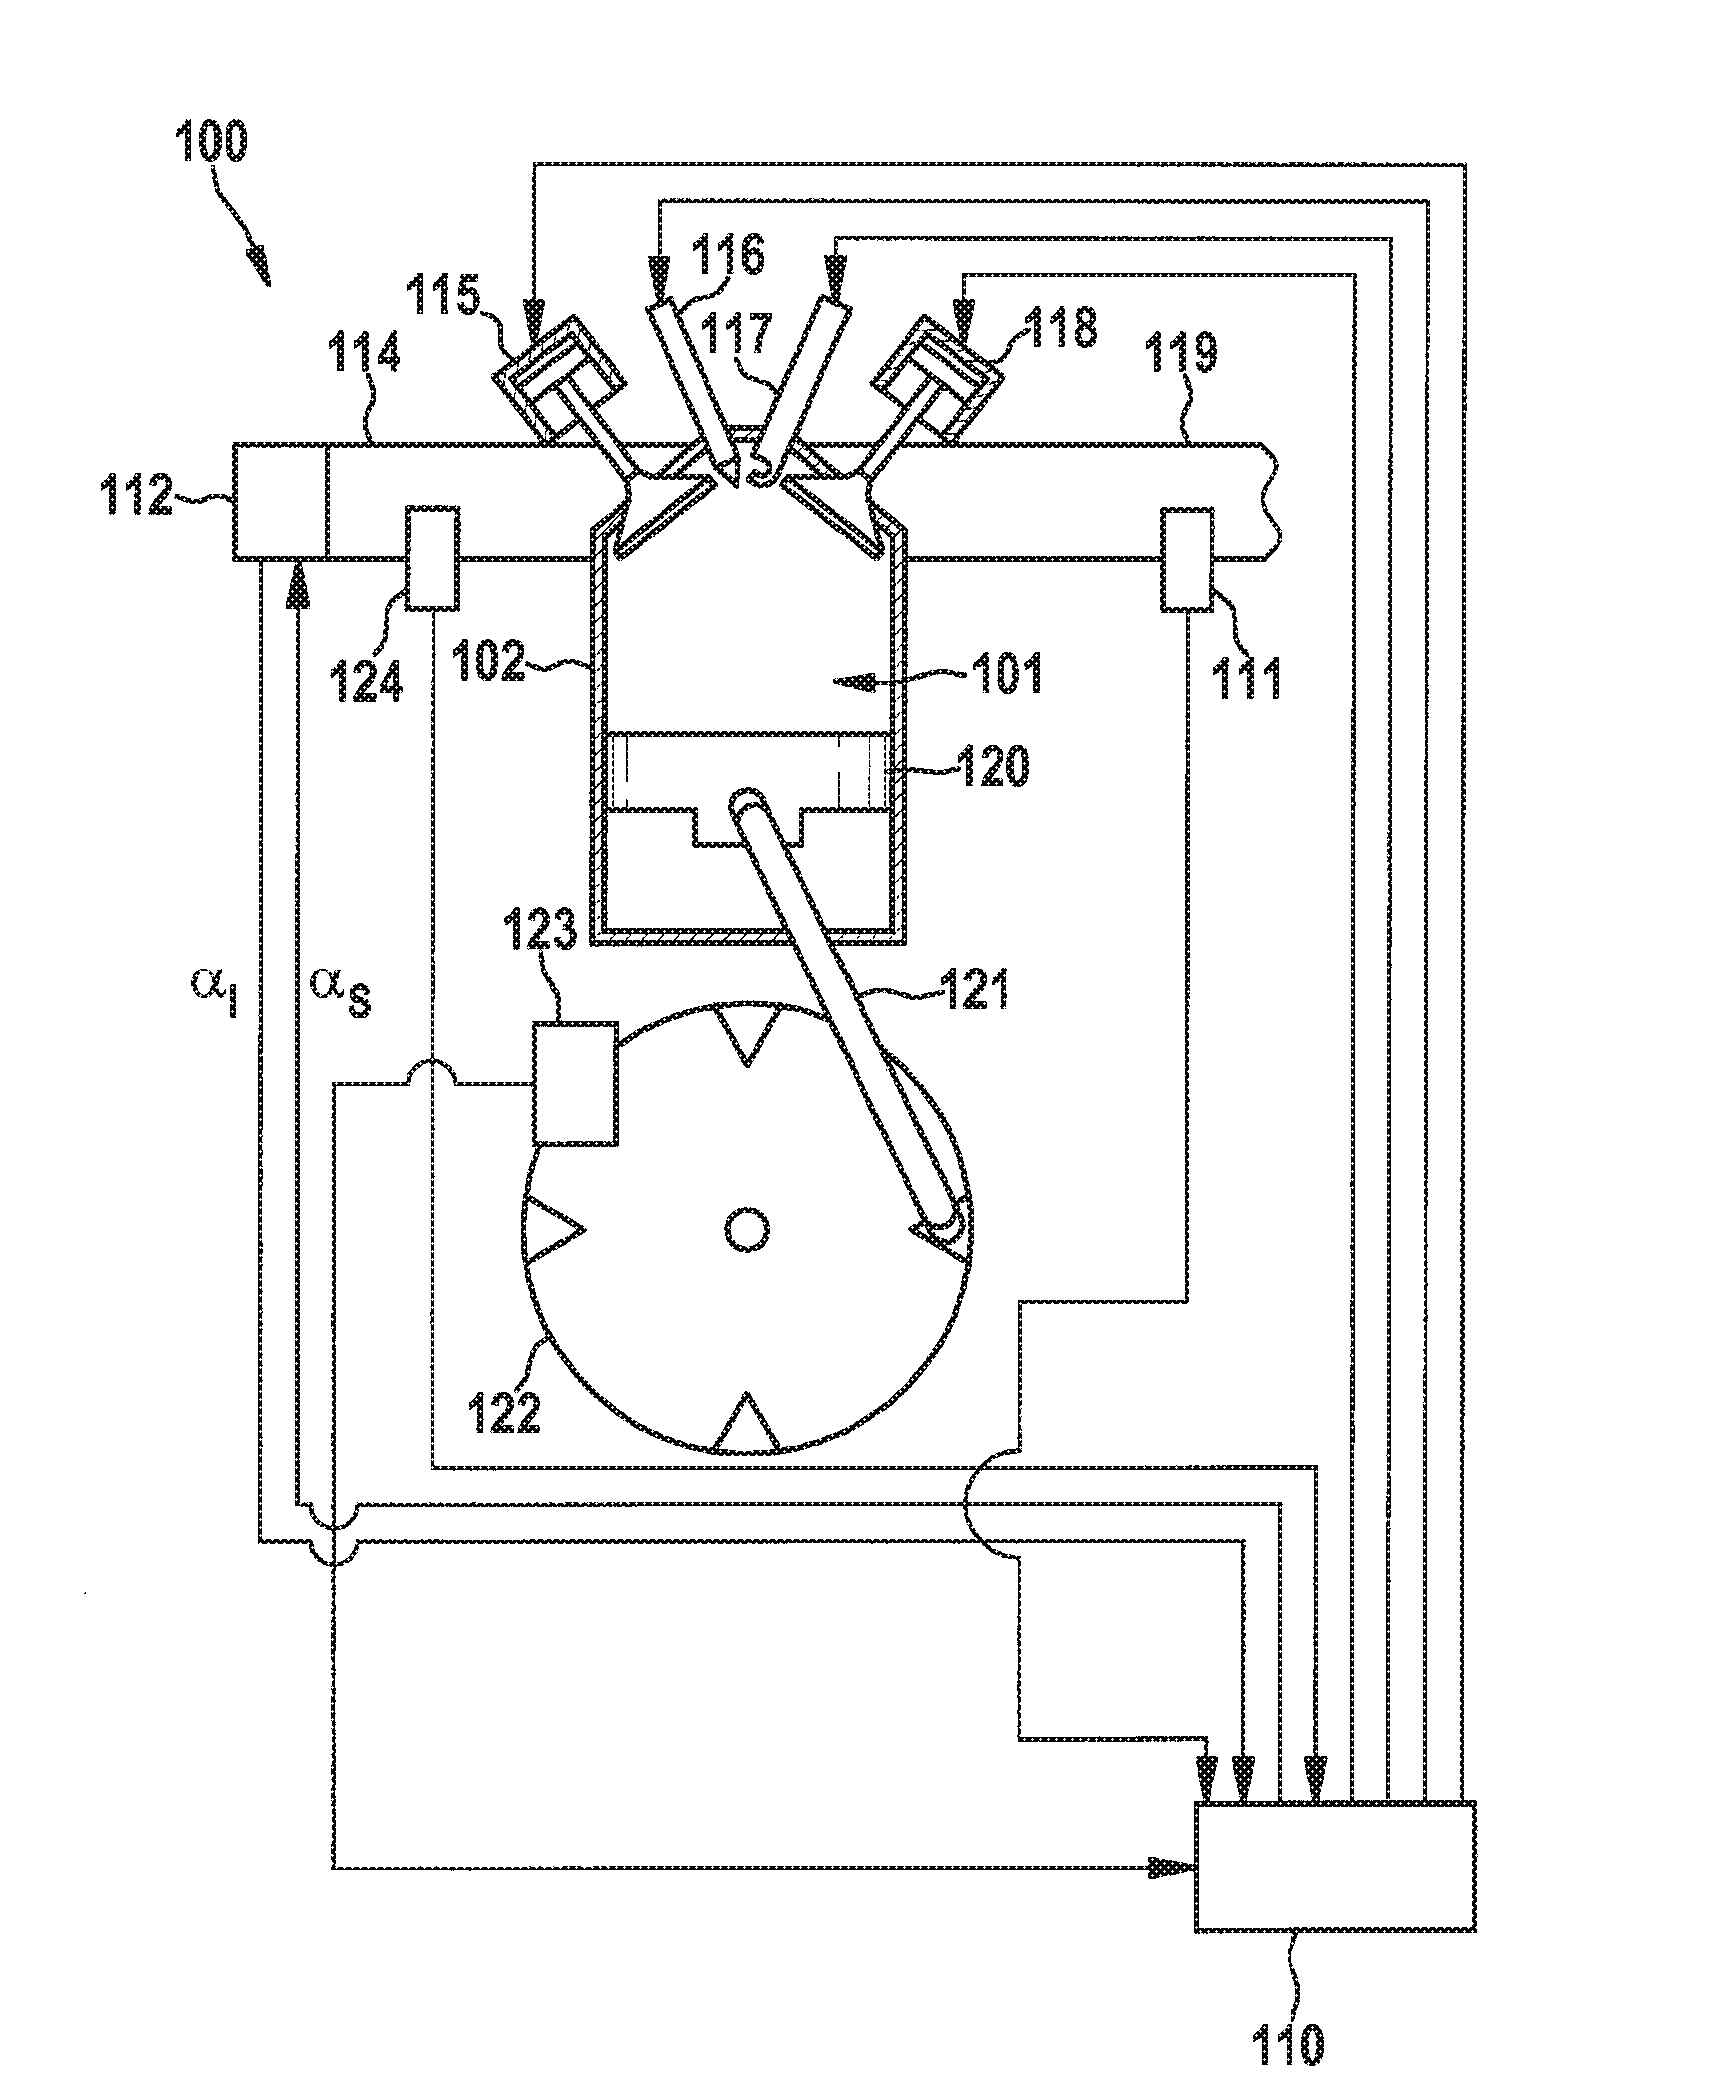 Method for isolating quantity errors of a fuel amount and an air amount delivered to at least cylinder of an internal combusion engine